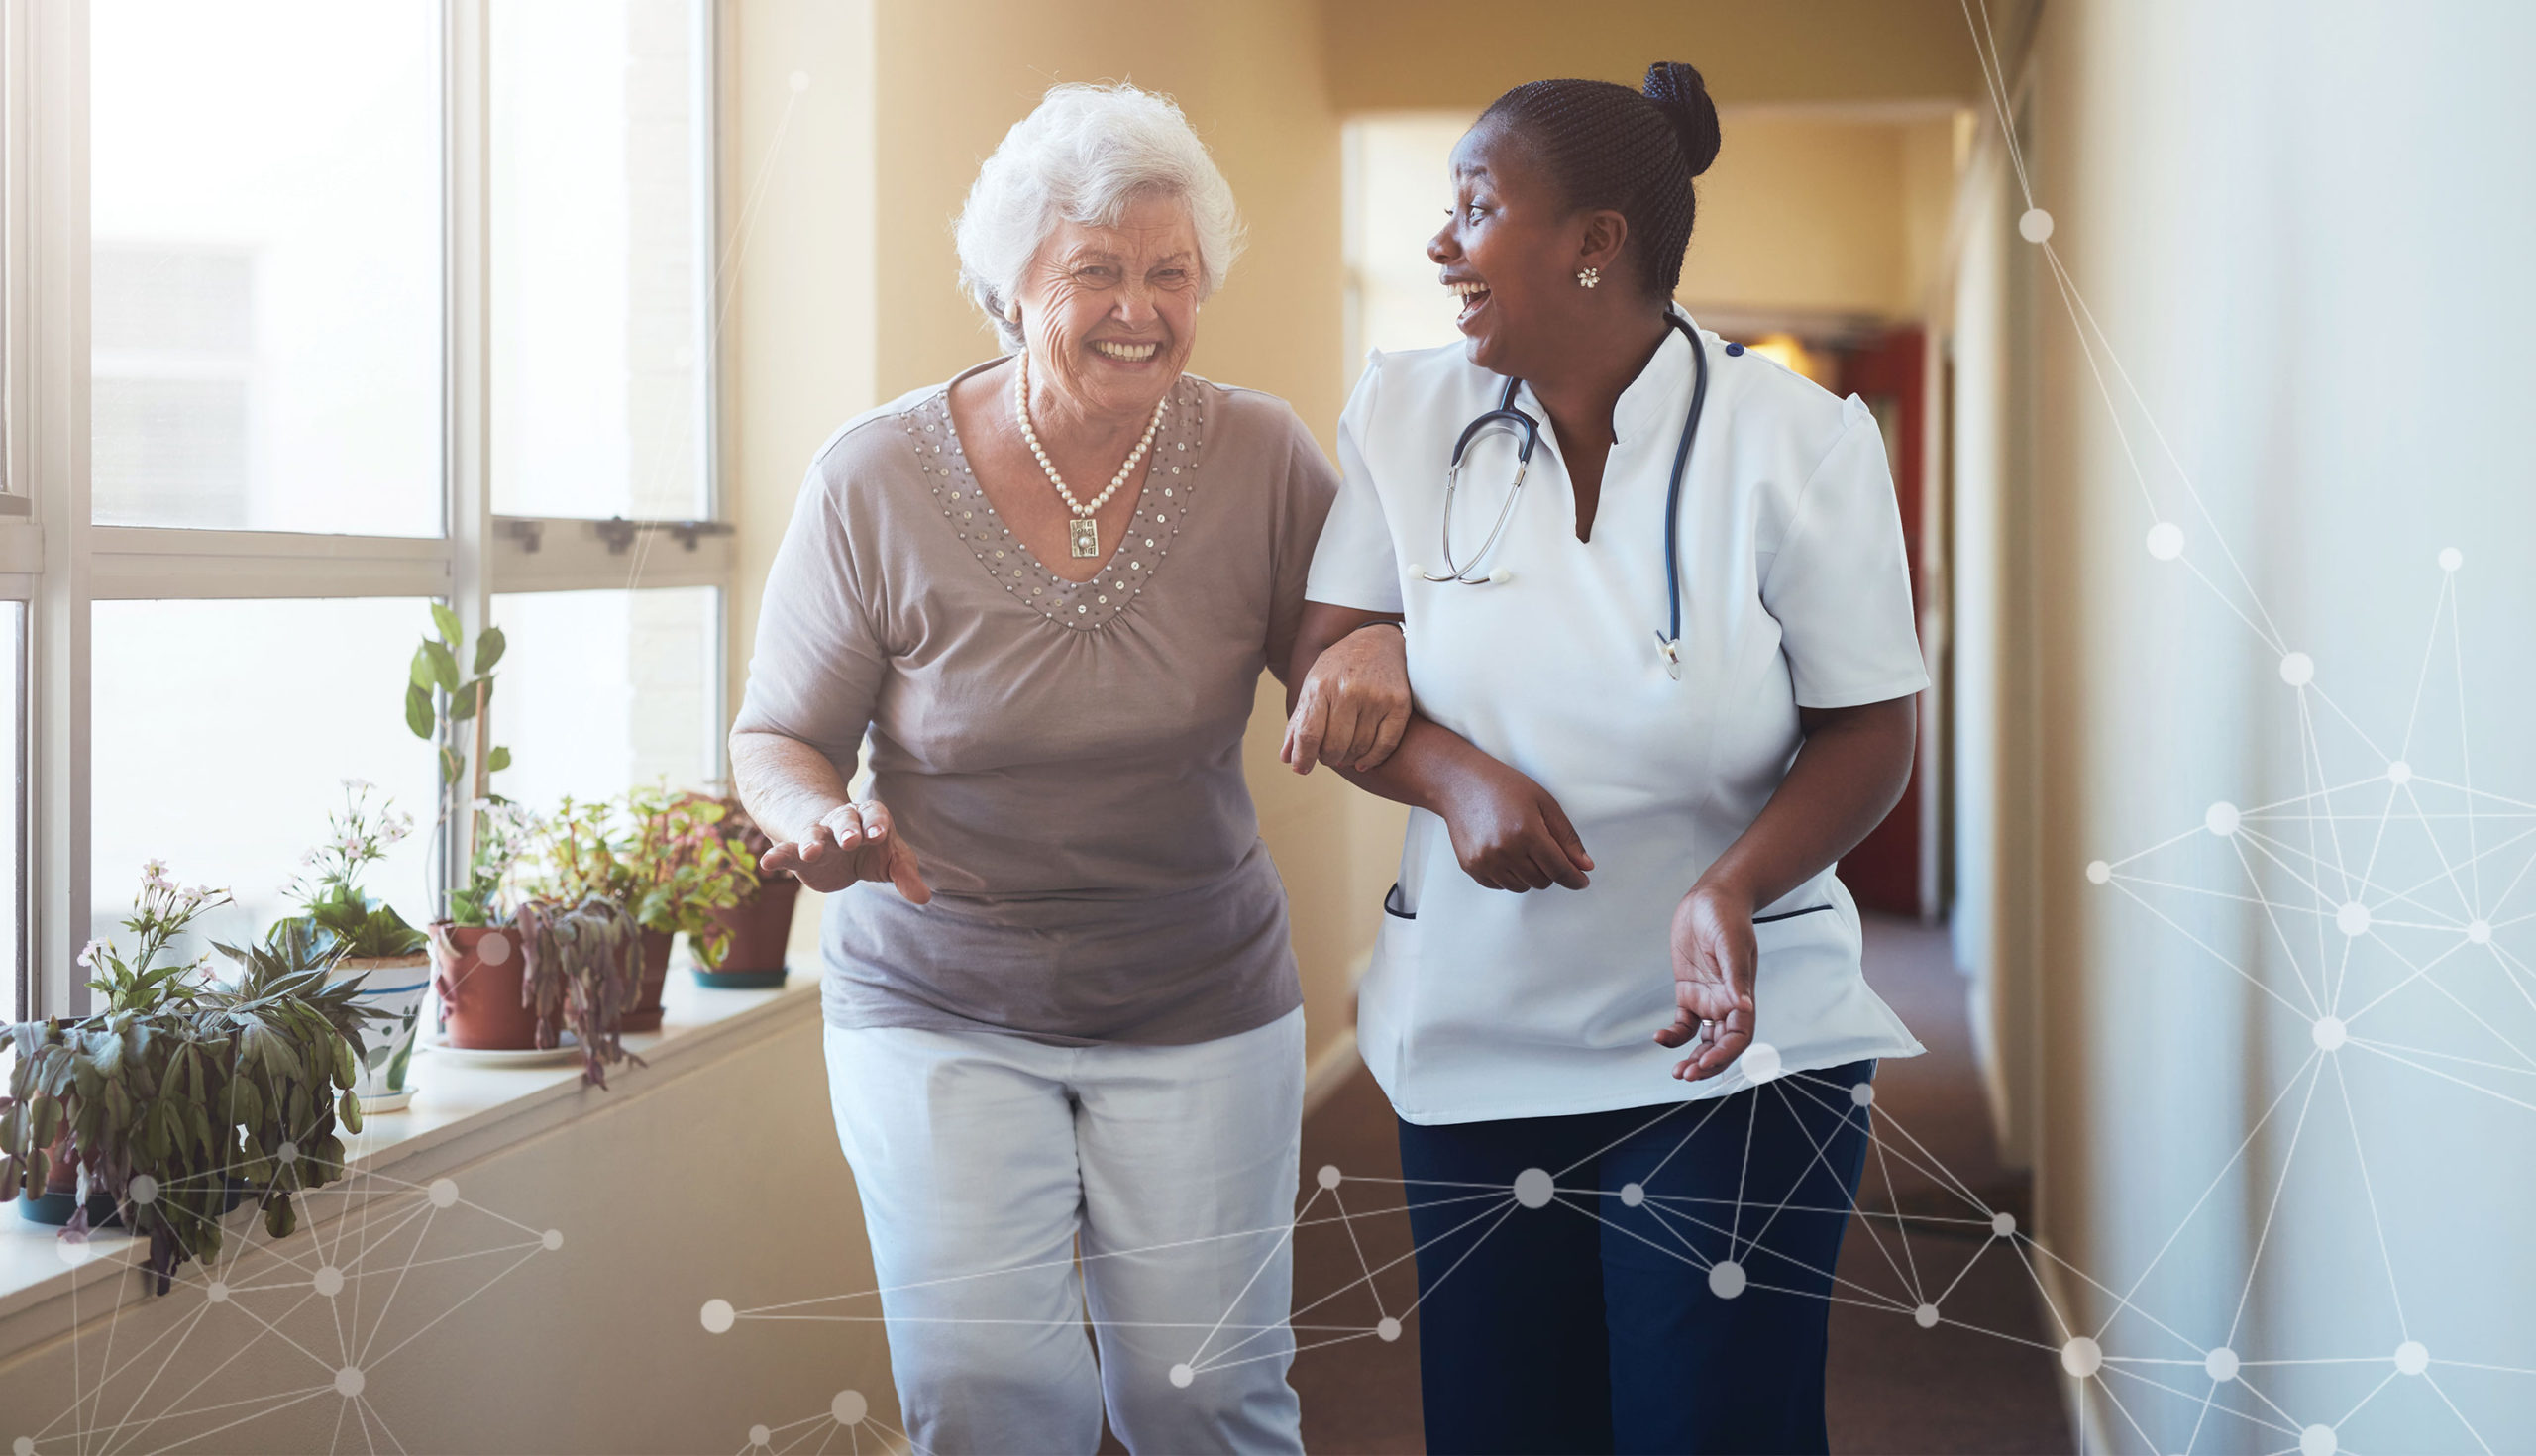 An elderly female patient walking arm in arm with a female health care worker. Both are smiling